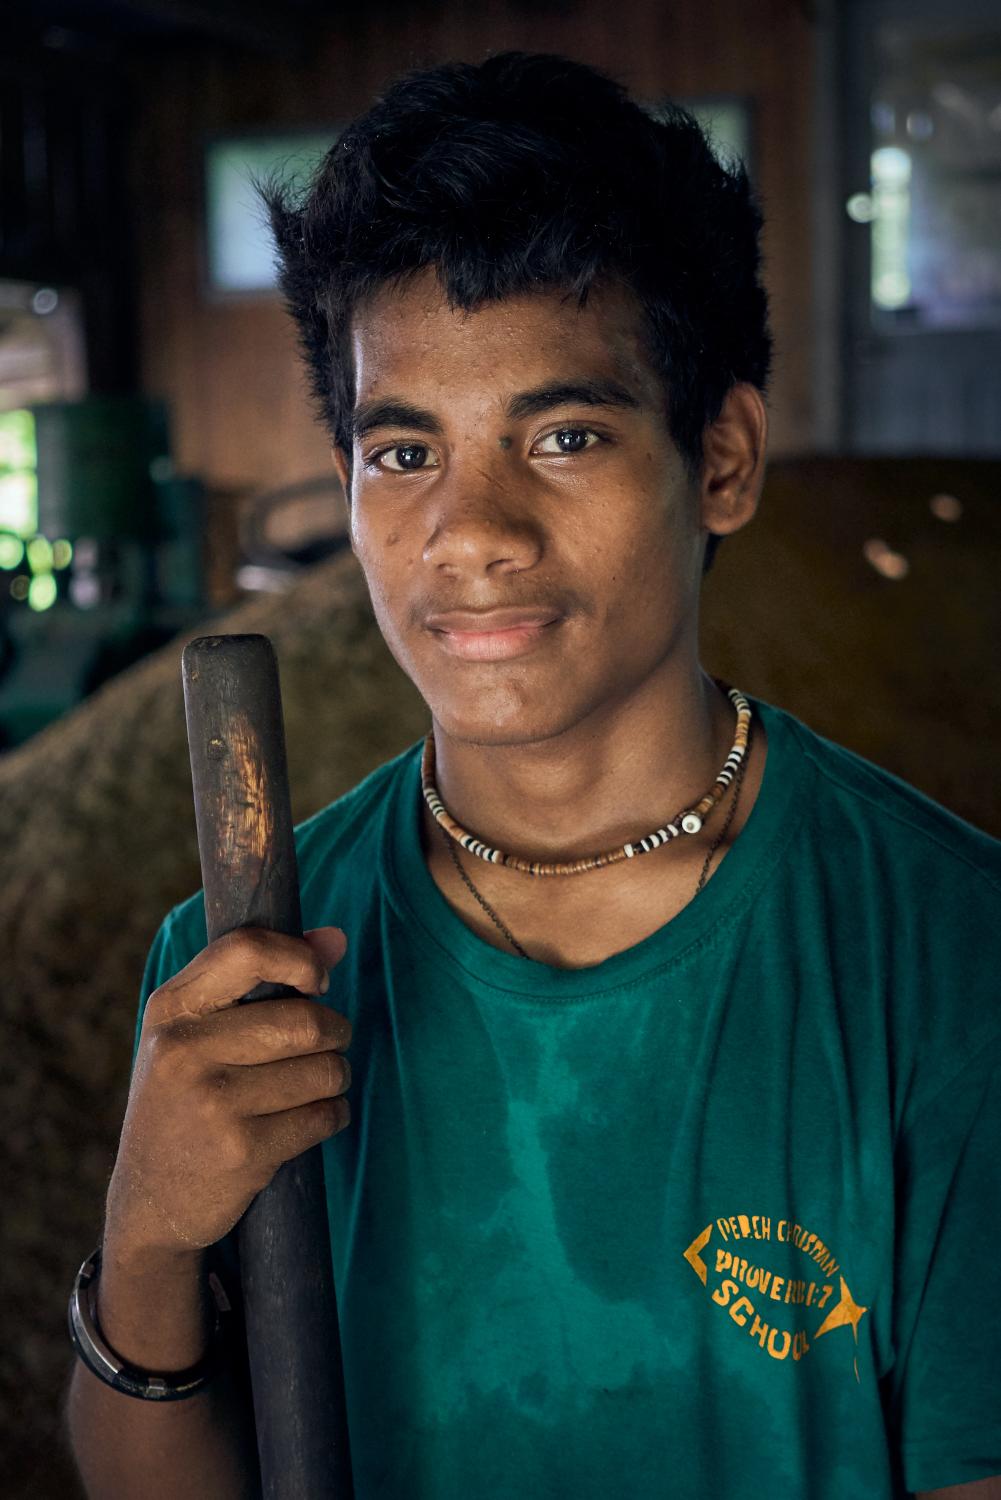 IFAD Photo Mission 2019 - Jonathan Atanikakia, age 15, in one of the workshops in...